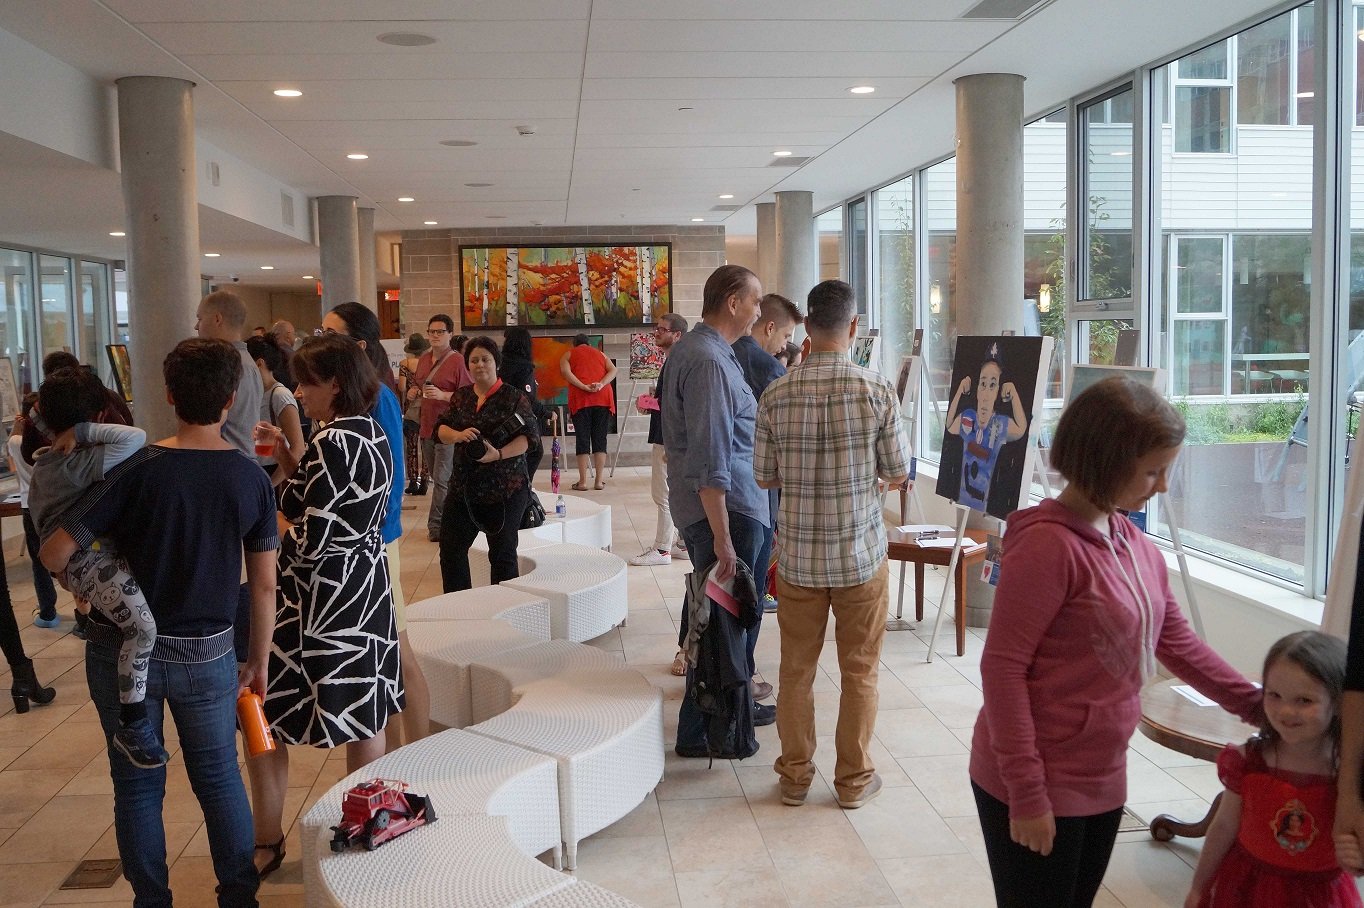 2015 - Guests enjoy the artwork at the the exhibition day of the Art of Healing, a fundraiser art collaboration with the Ronald MacDonald House